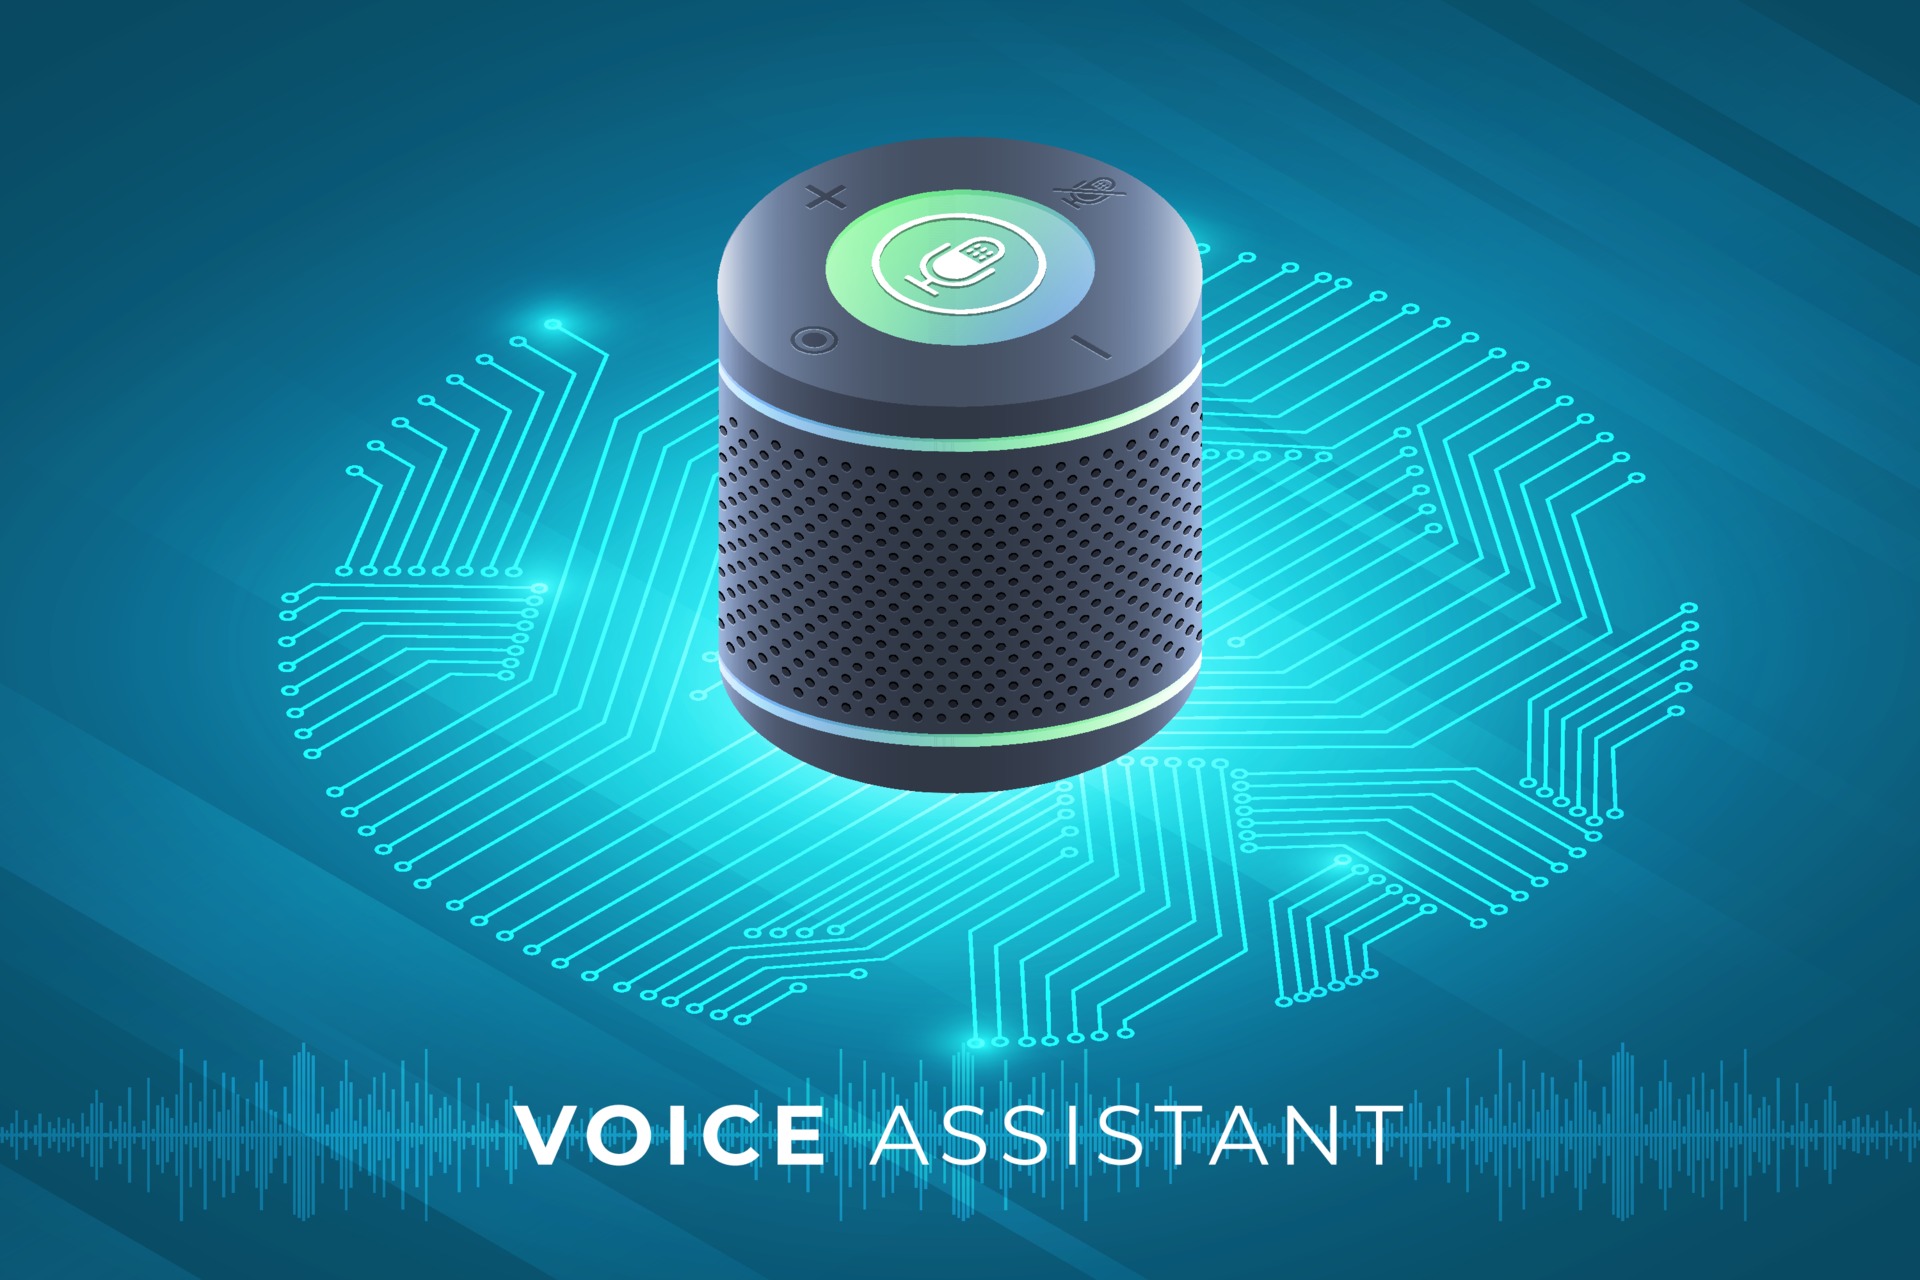 Voice Assistant. Things voice